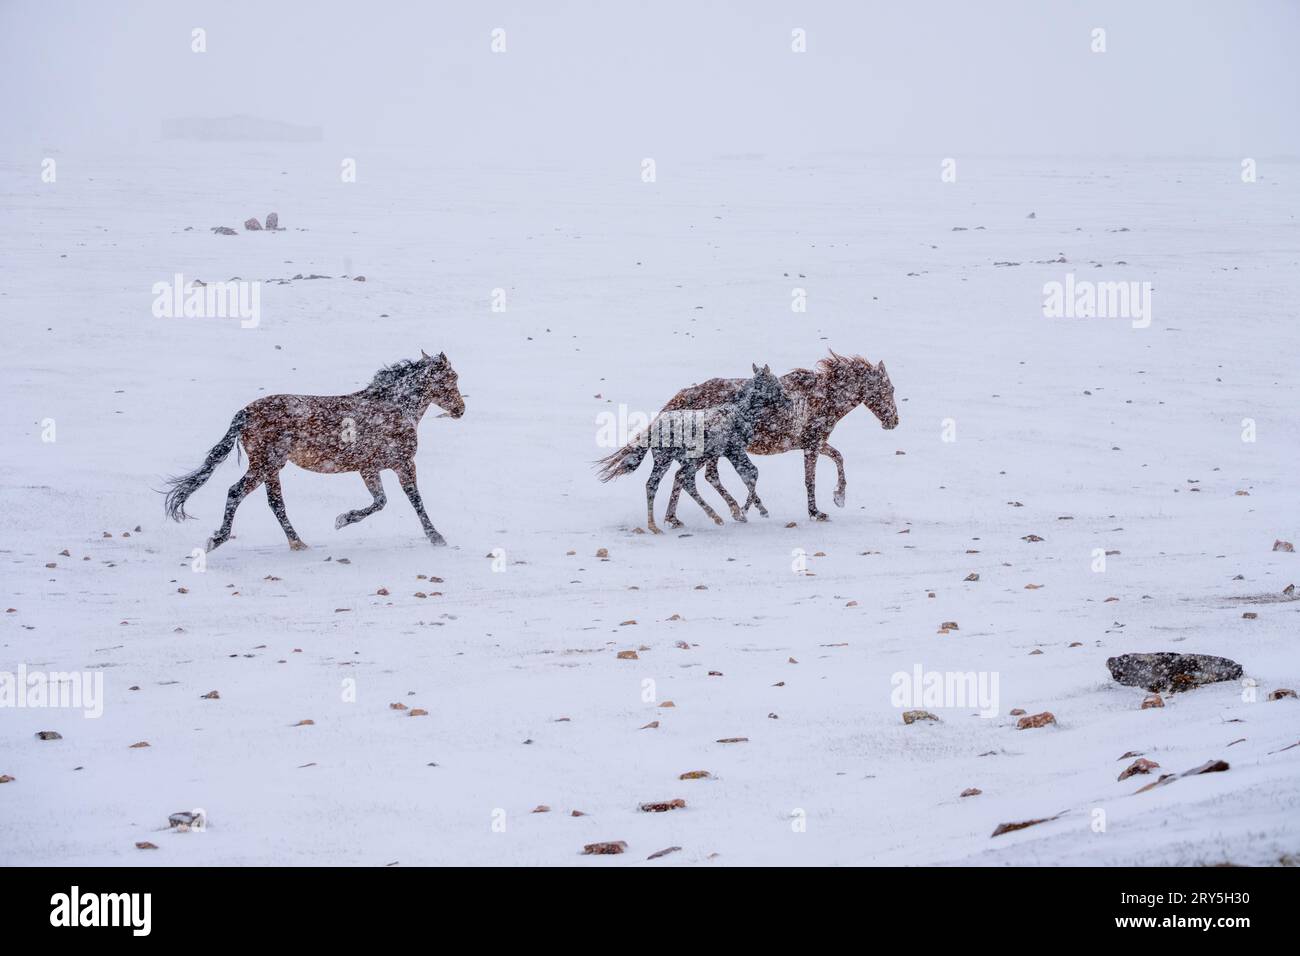 Herd of Horses galloping in the snow in Kyrgyzstan Stock Photo